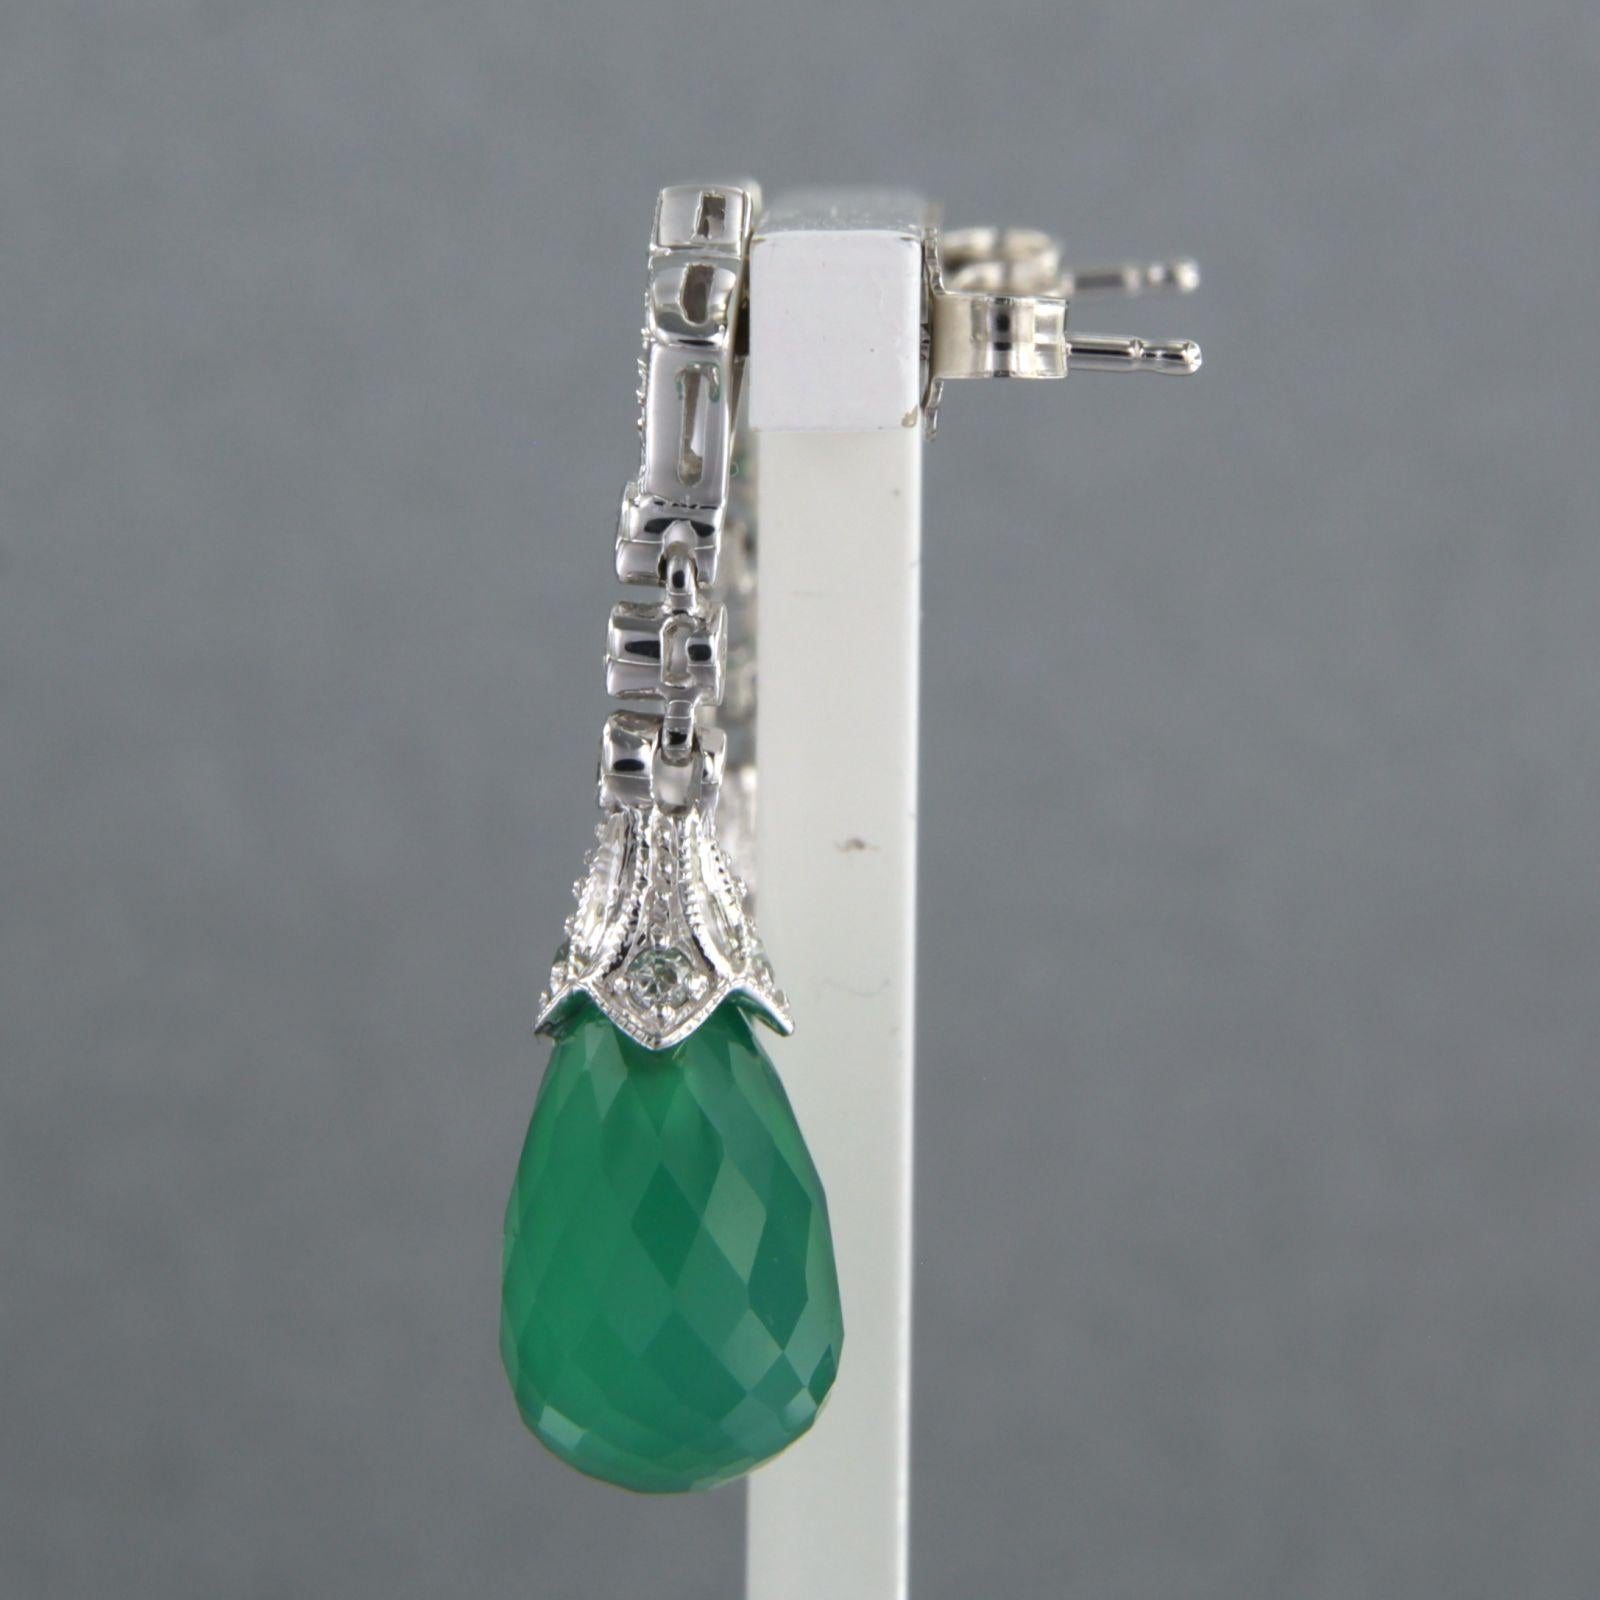 Single Cut 14kt white gold earrings set with green onyx and single cut diamond total 0.34ct For Sale